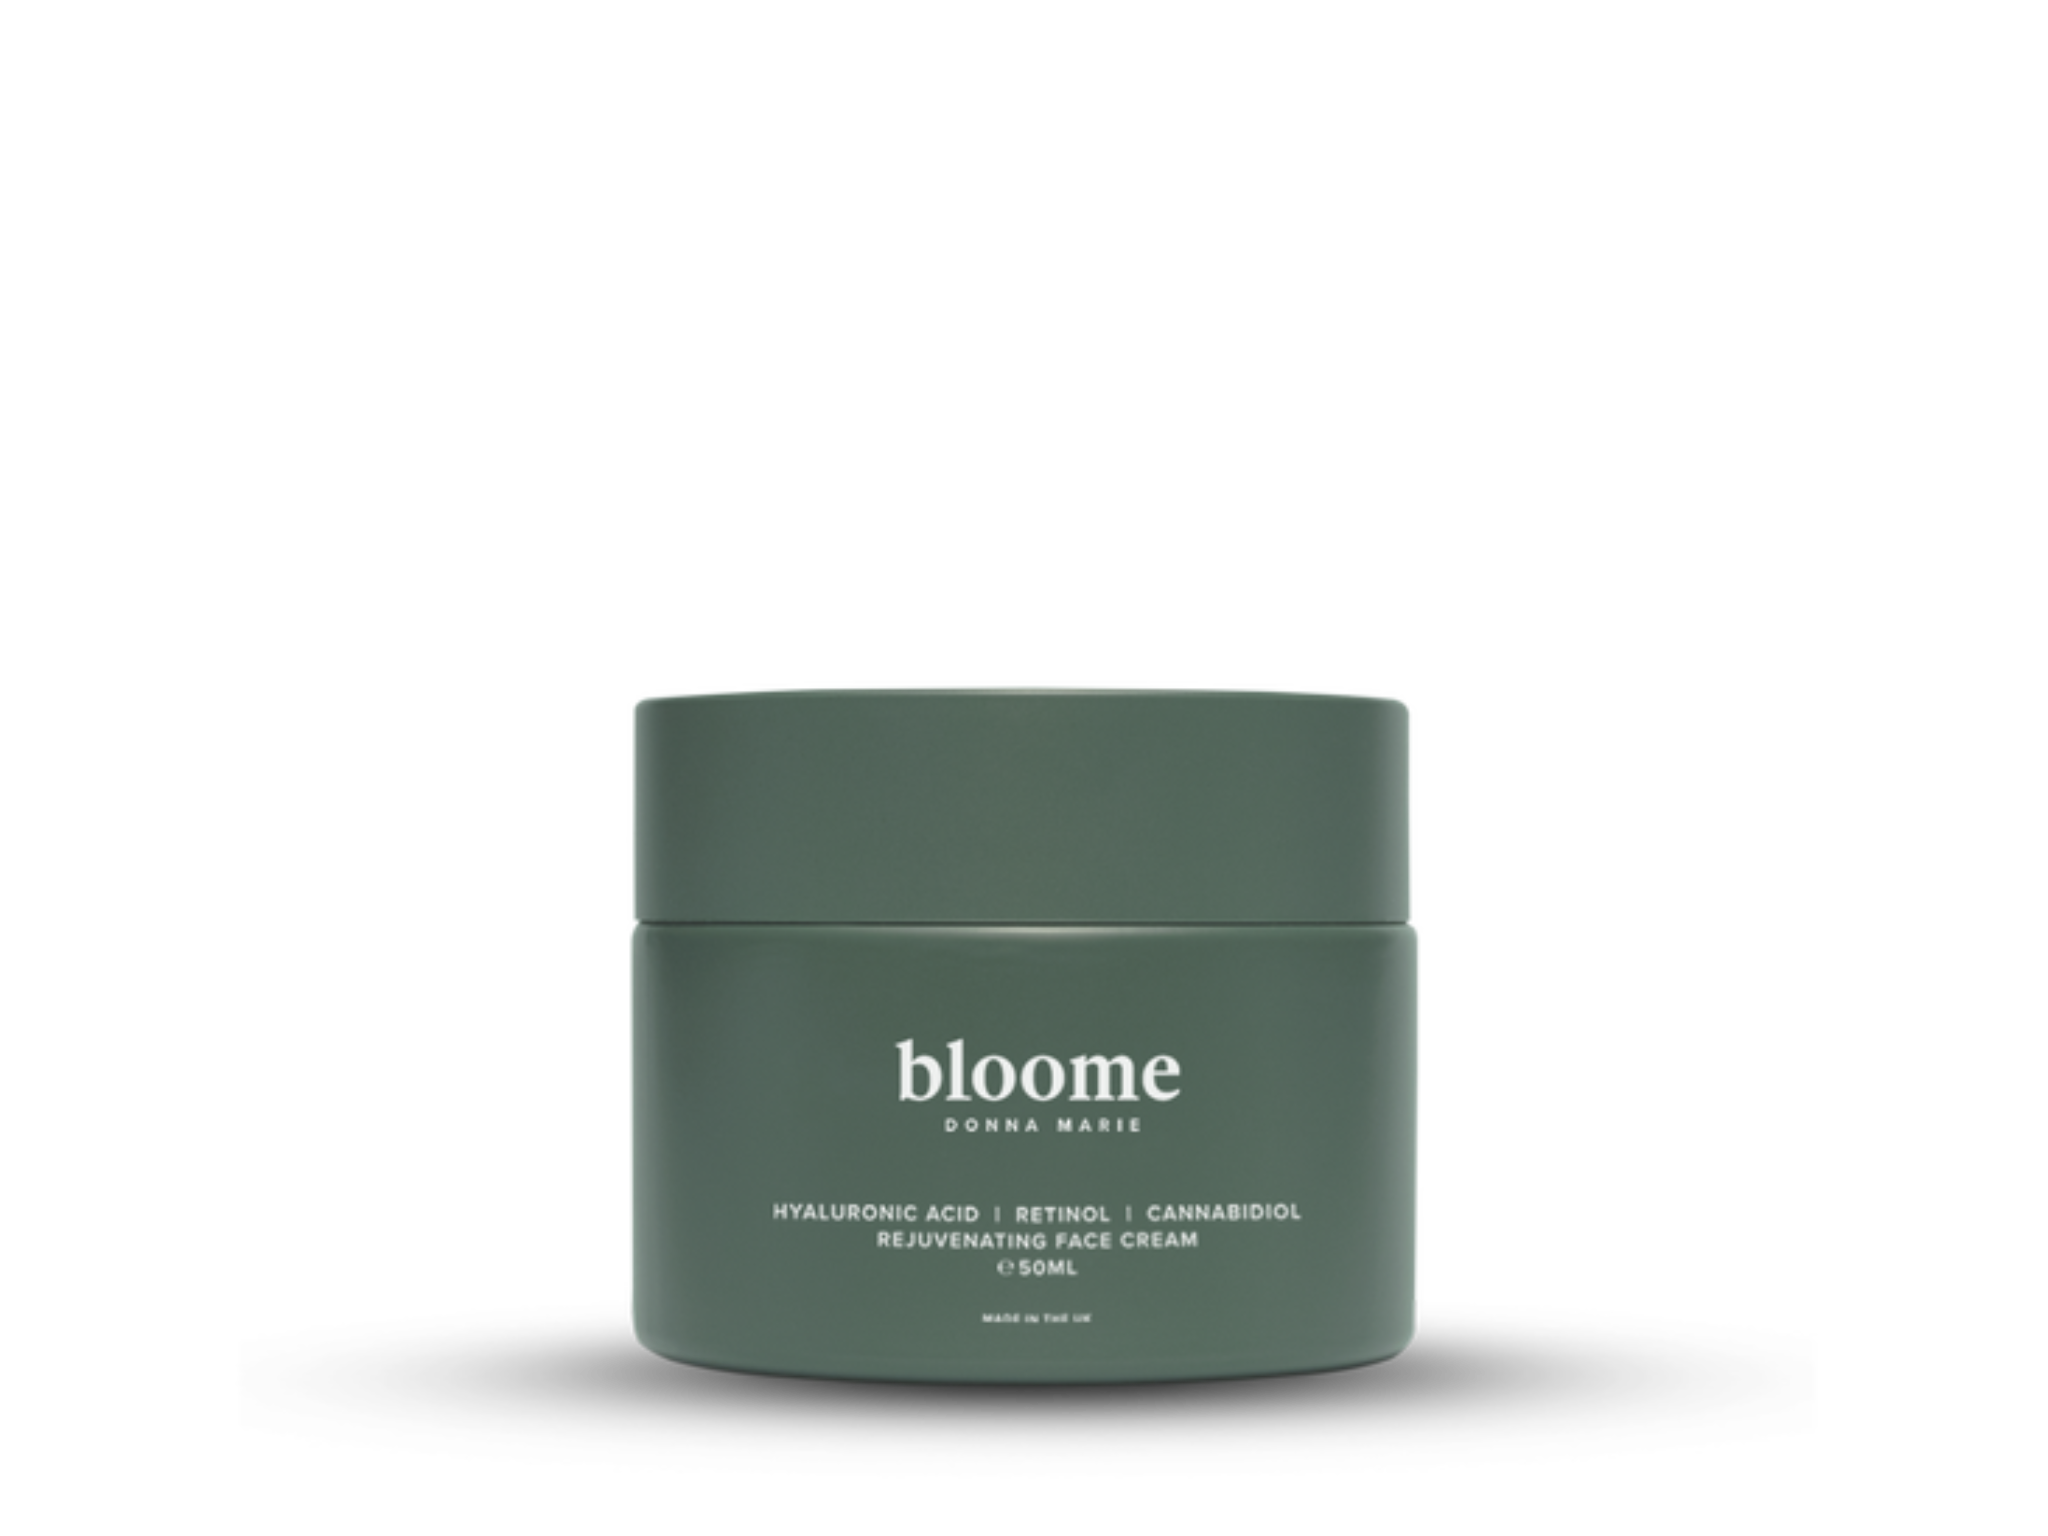 Bloome-indybest 